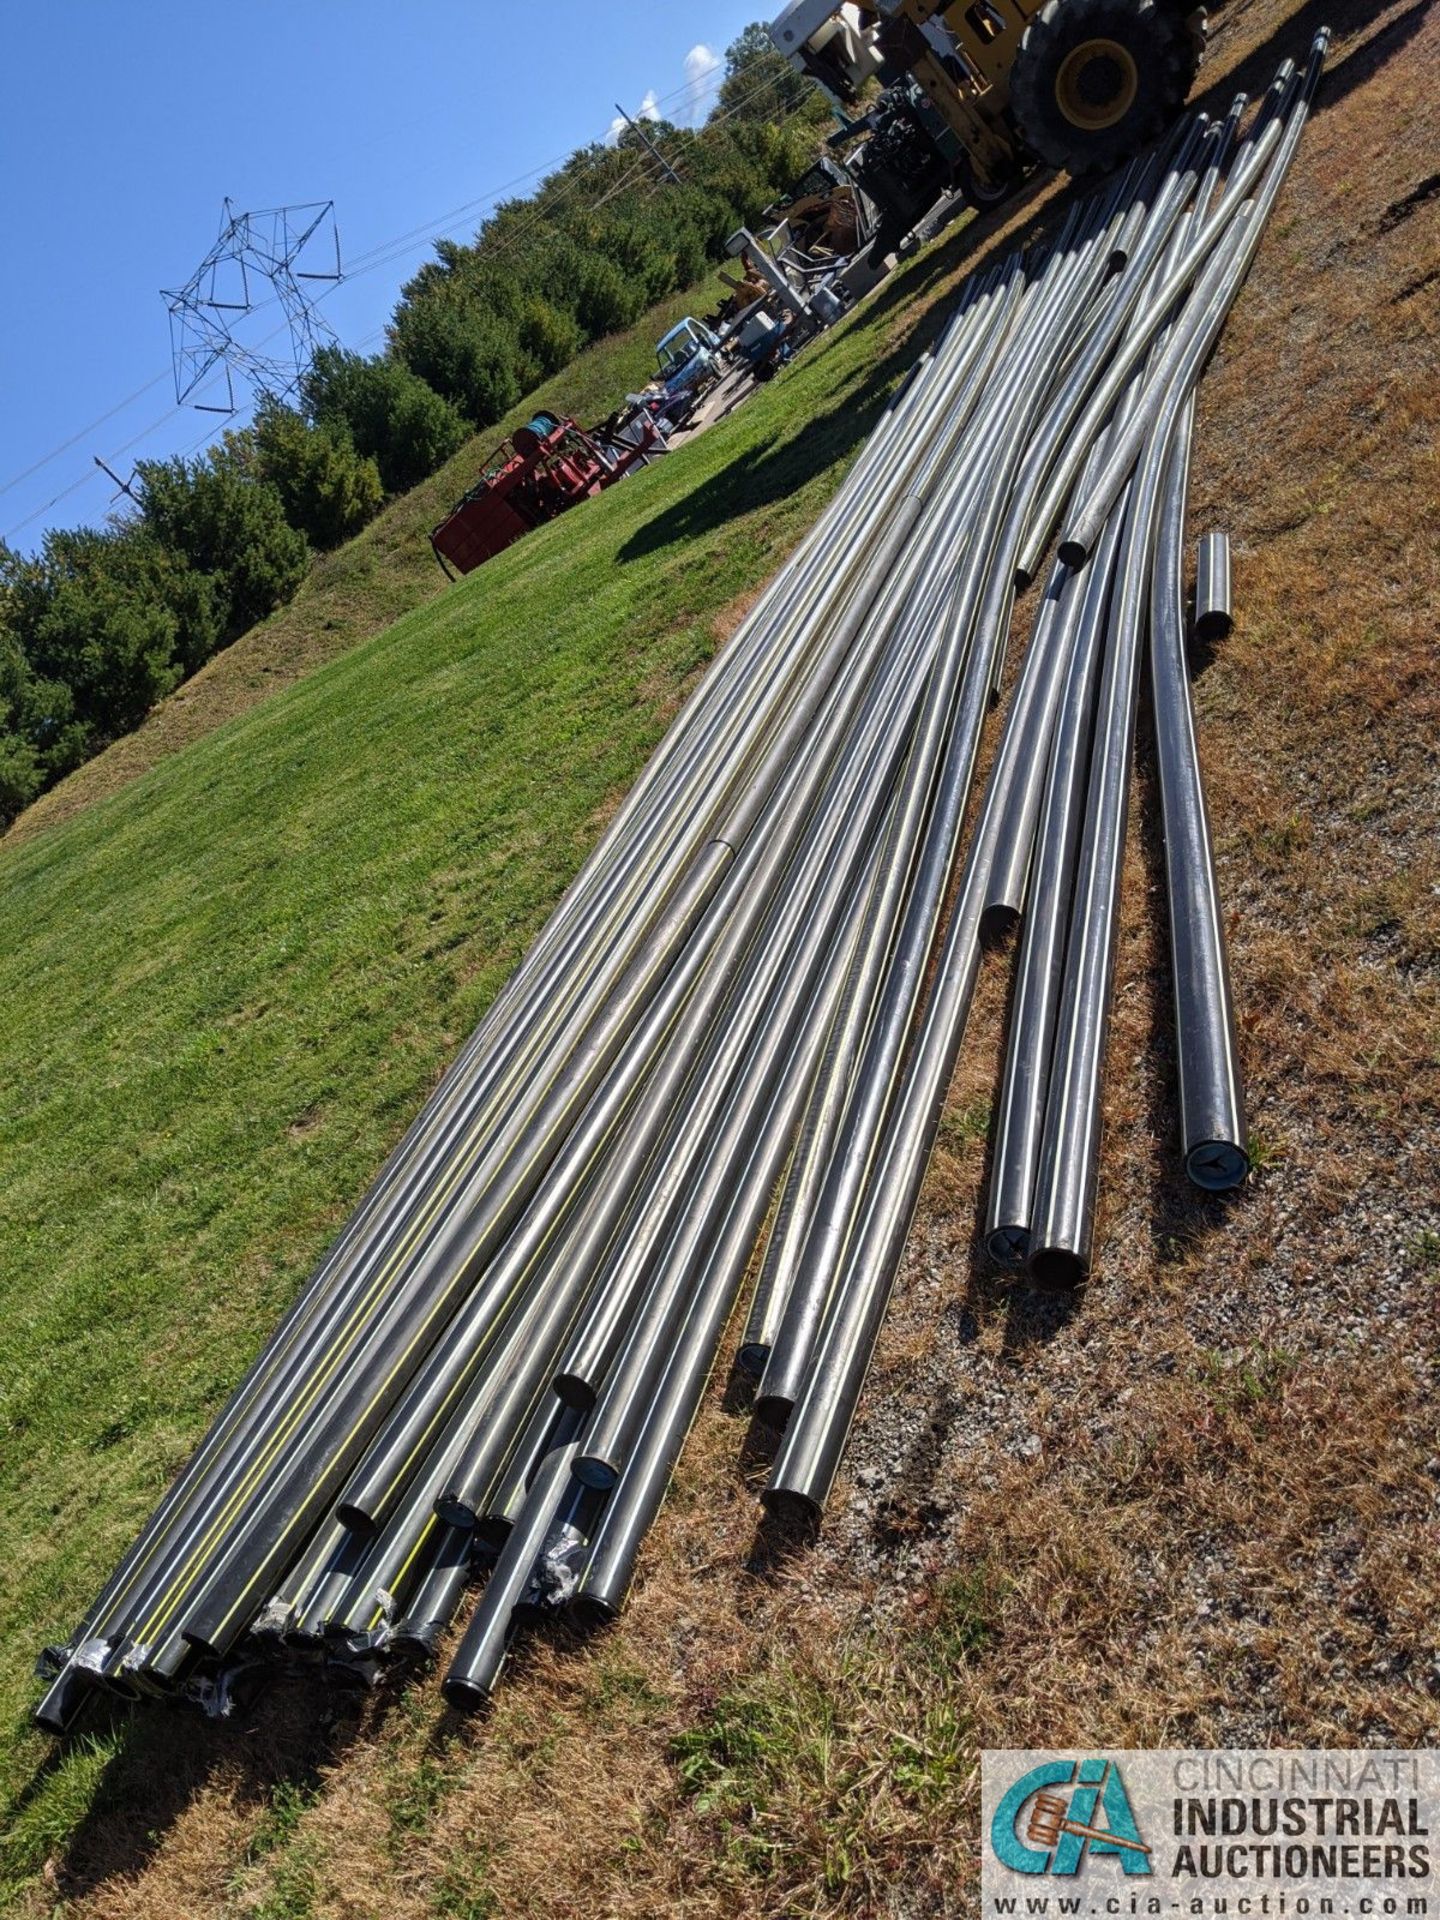 JOINTS OF 4" DIA. X 45' LONG BLACK PLASTIC PIPE (220 Blackbrook Rd., Painsville, OH 44077 - Greg